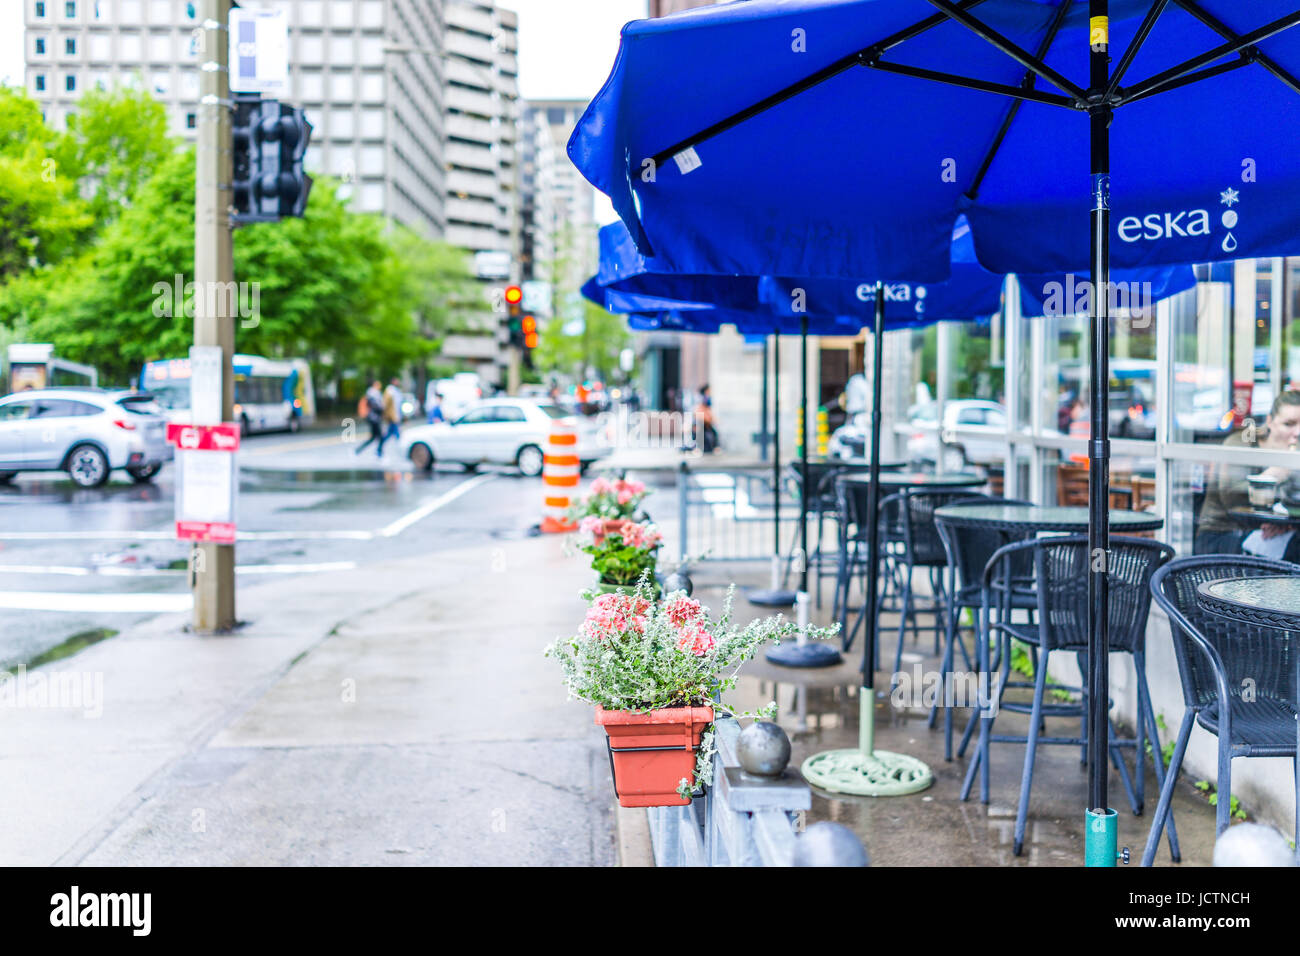 Montreal, Canada - May 26, 2017: Downtown area of city in Quebec region with restaurants and cafe with umbrella stands with Eska sign, outdoor patio t Stock Photo